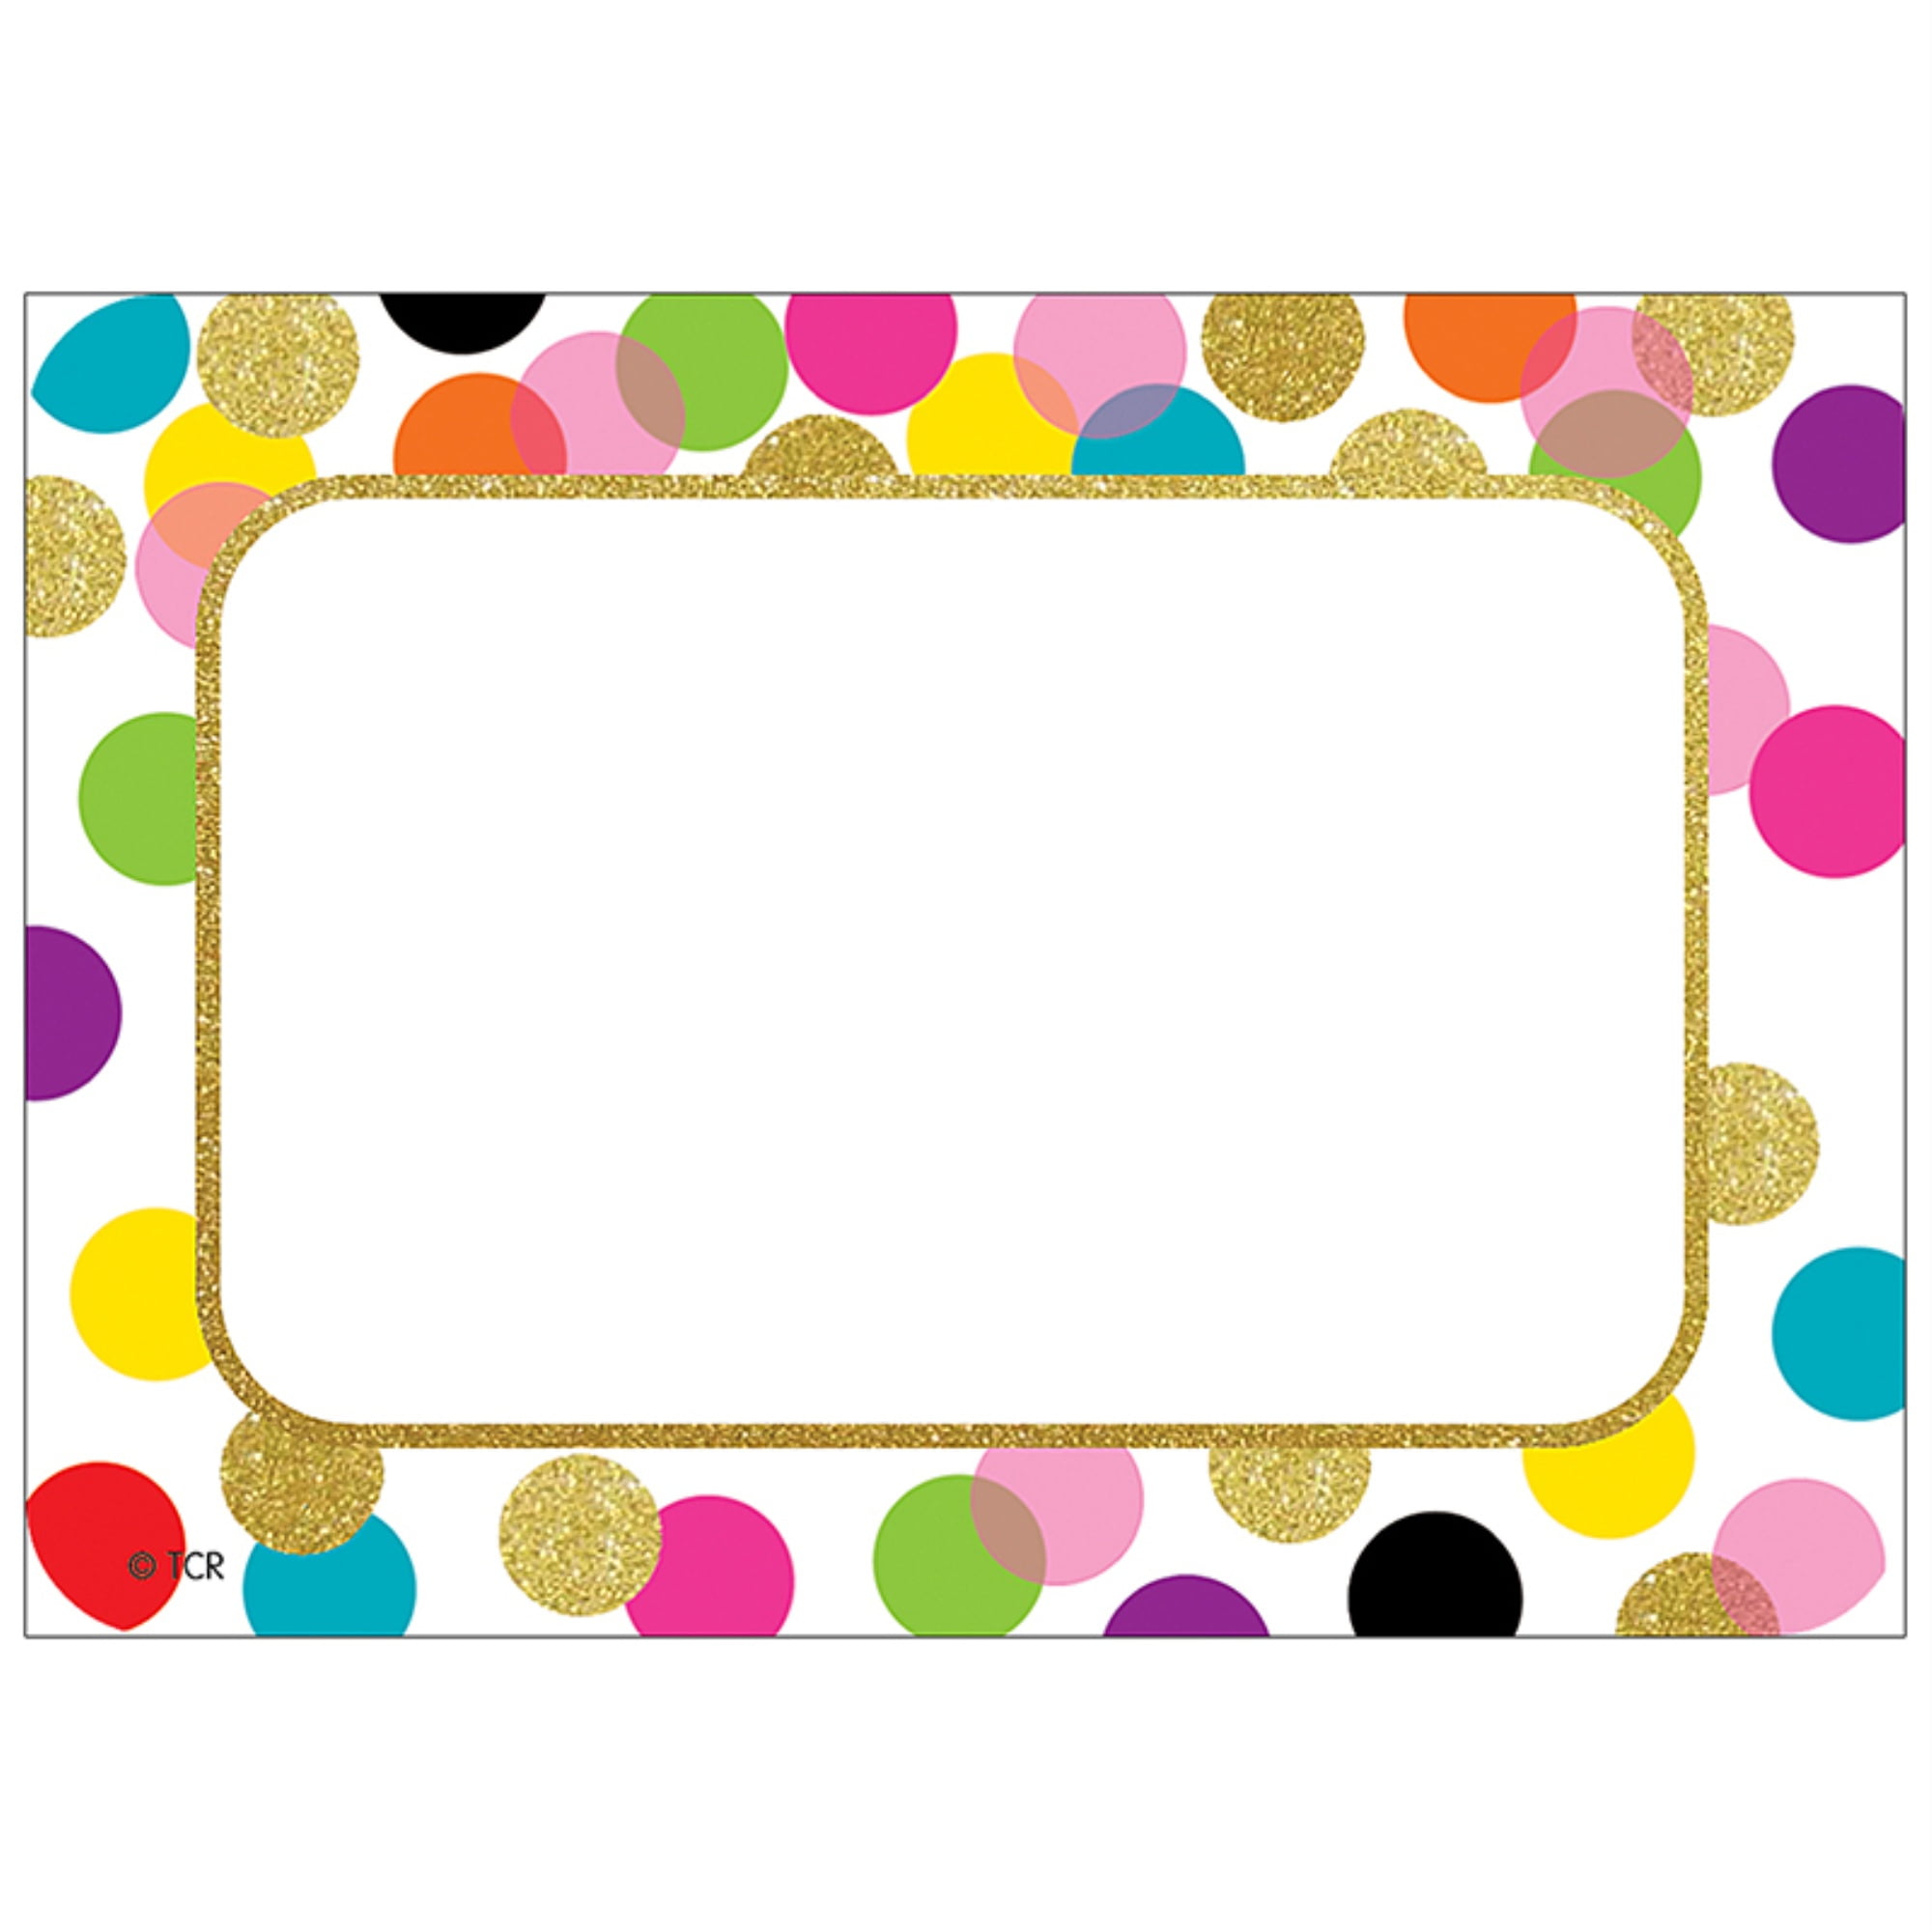 200 Labels Name Tag Sticker Self-Adhesive Blank 4 Colors Camp Home School Office 